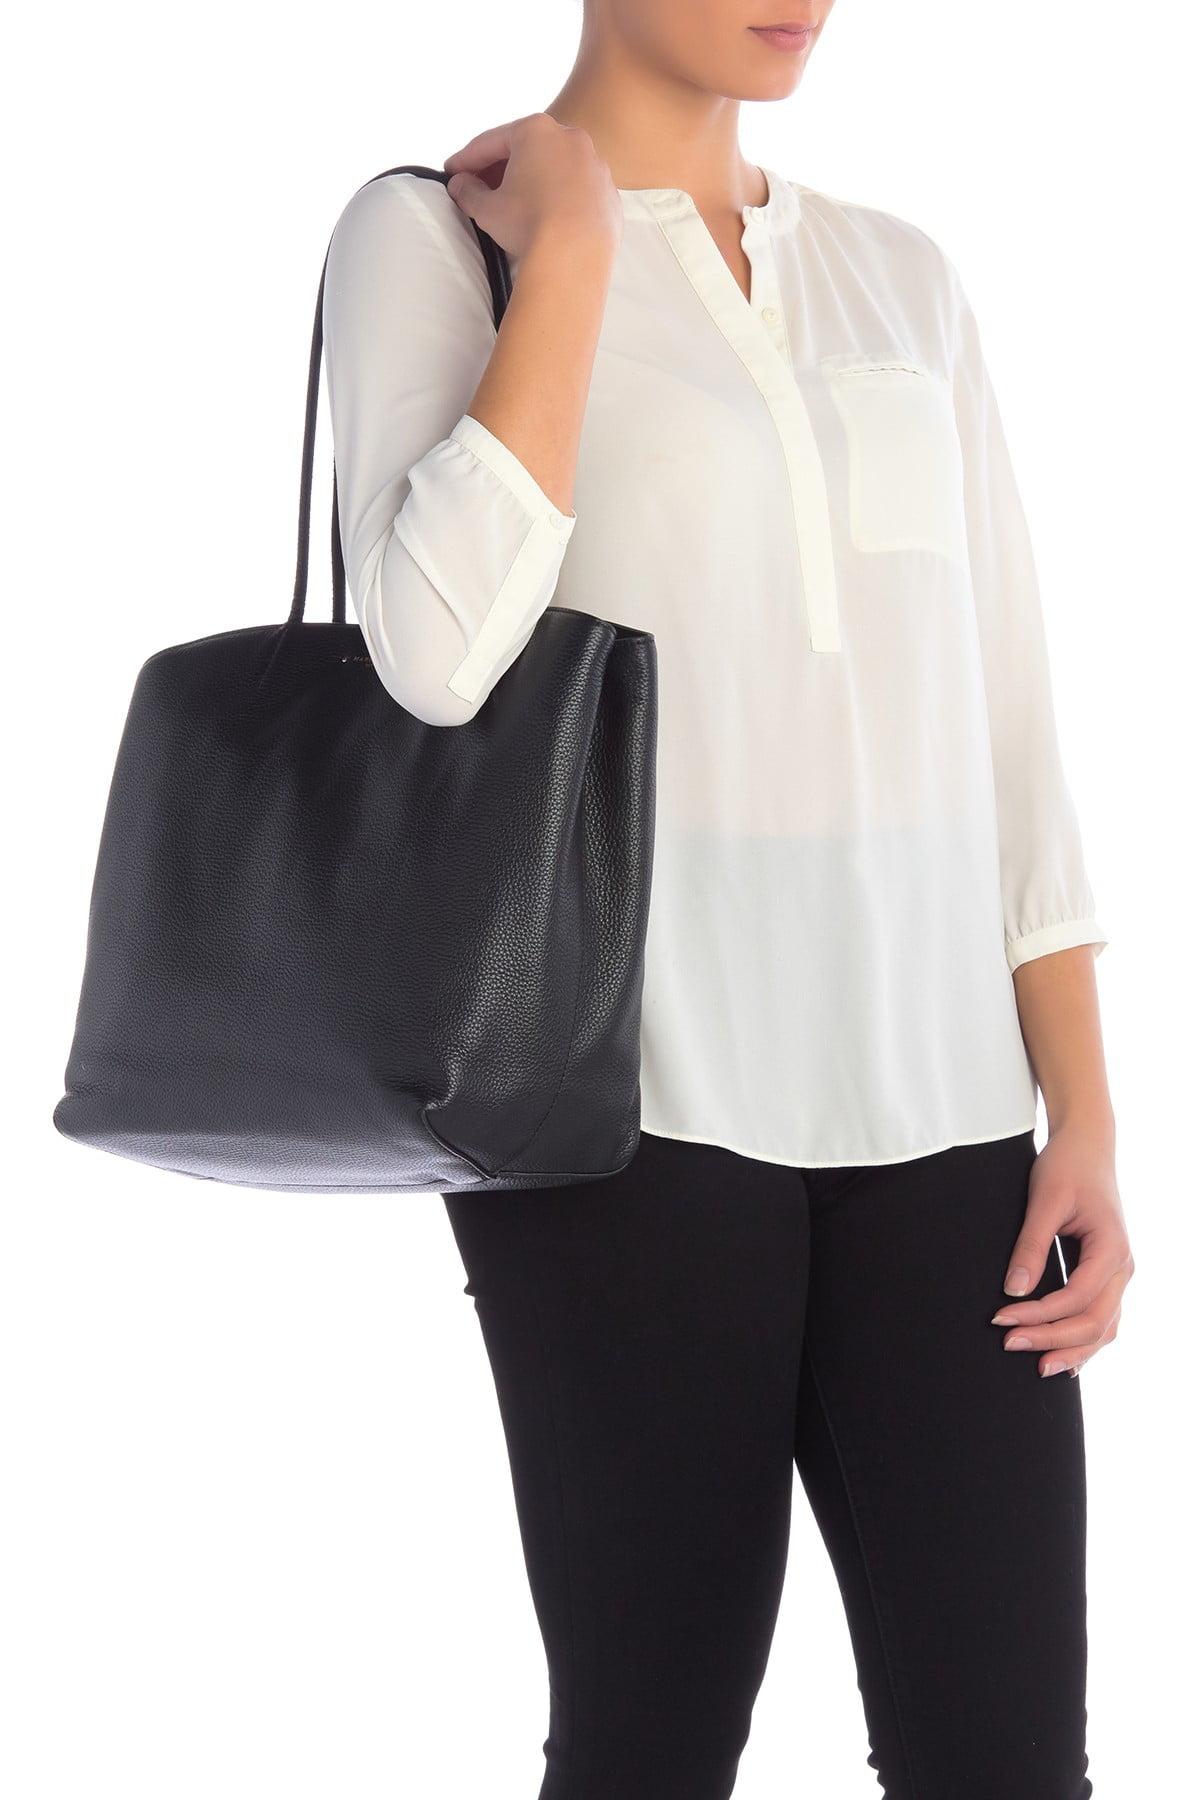 Marc Jacobs Supple Leather Tote Bag in Black | Lyst